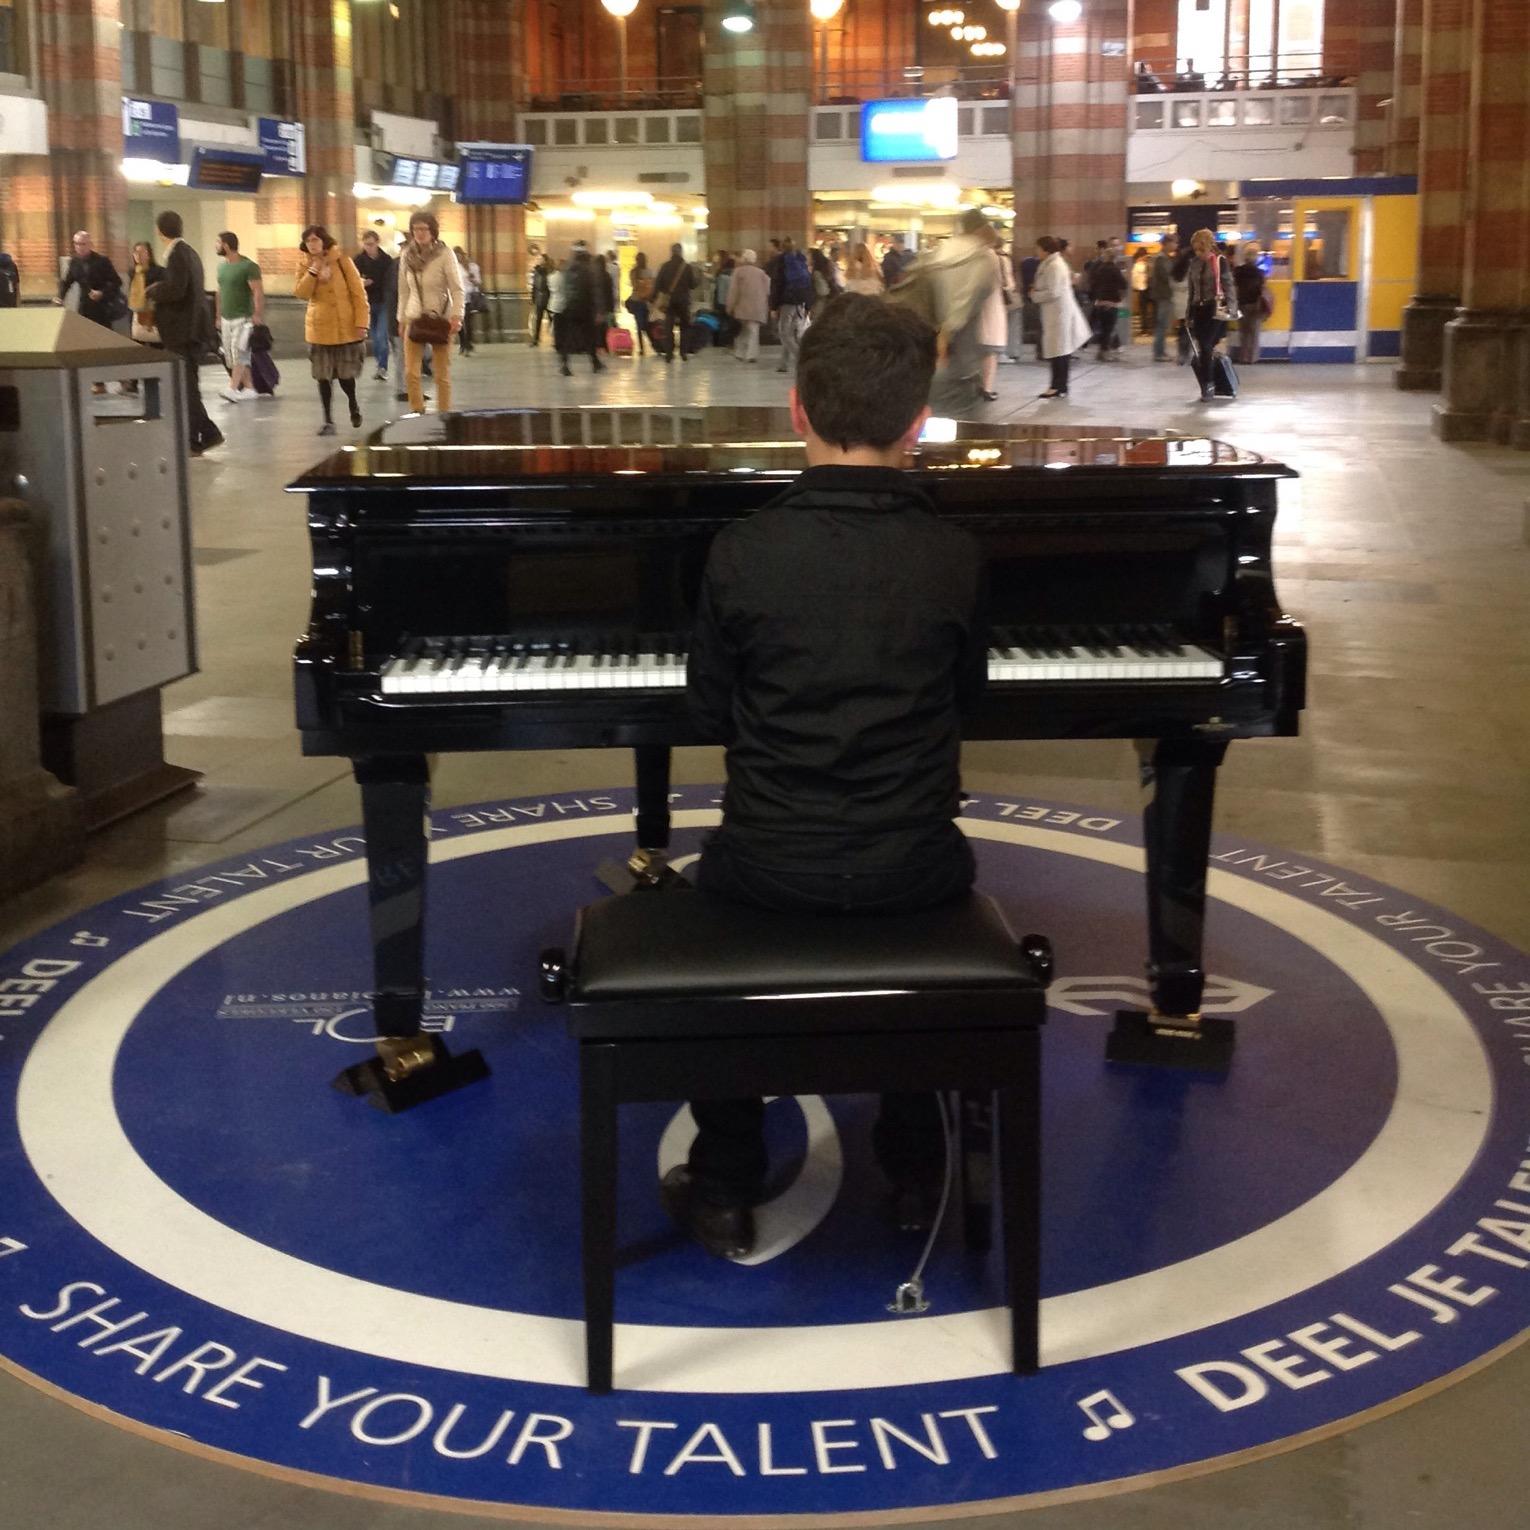 Bespeel mij op Amsterdam Centraal Station Volg mij en stuur je video's! // Play me at Amsterdam Central Station. Follow and send your video's!